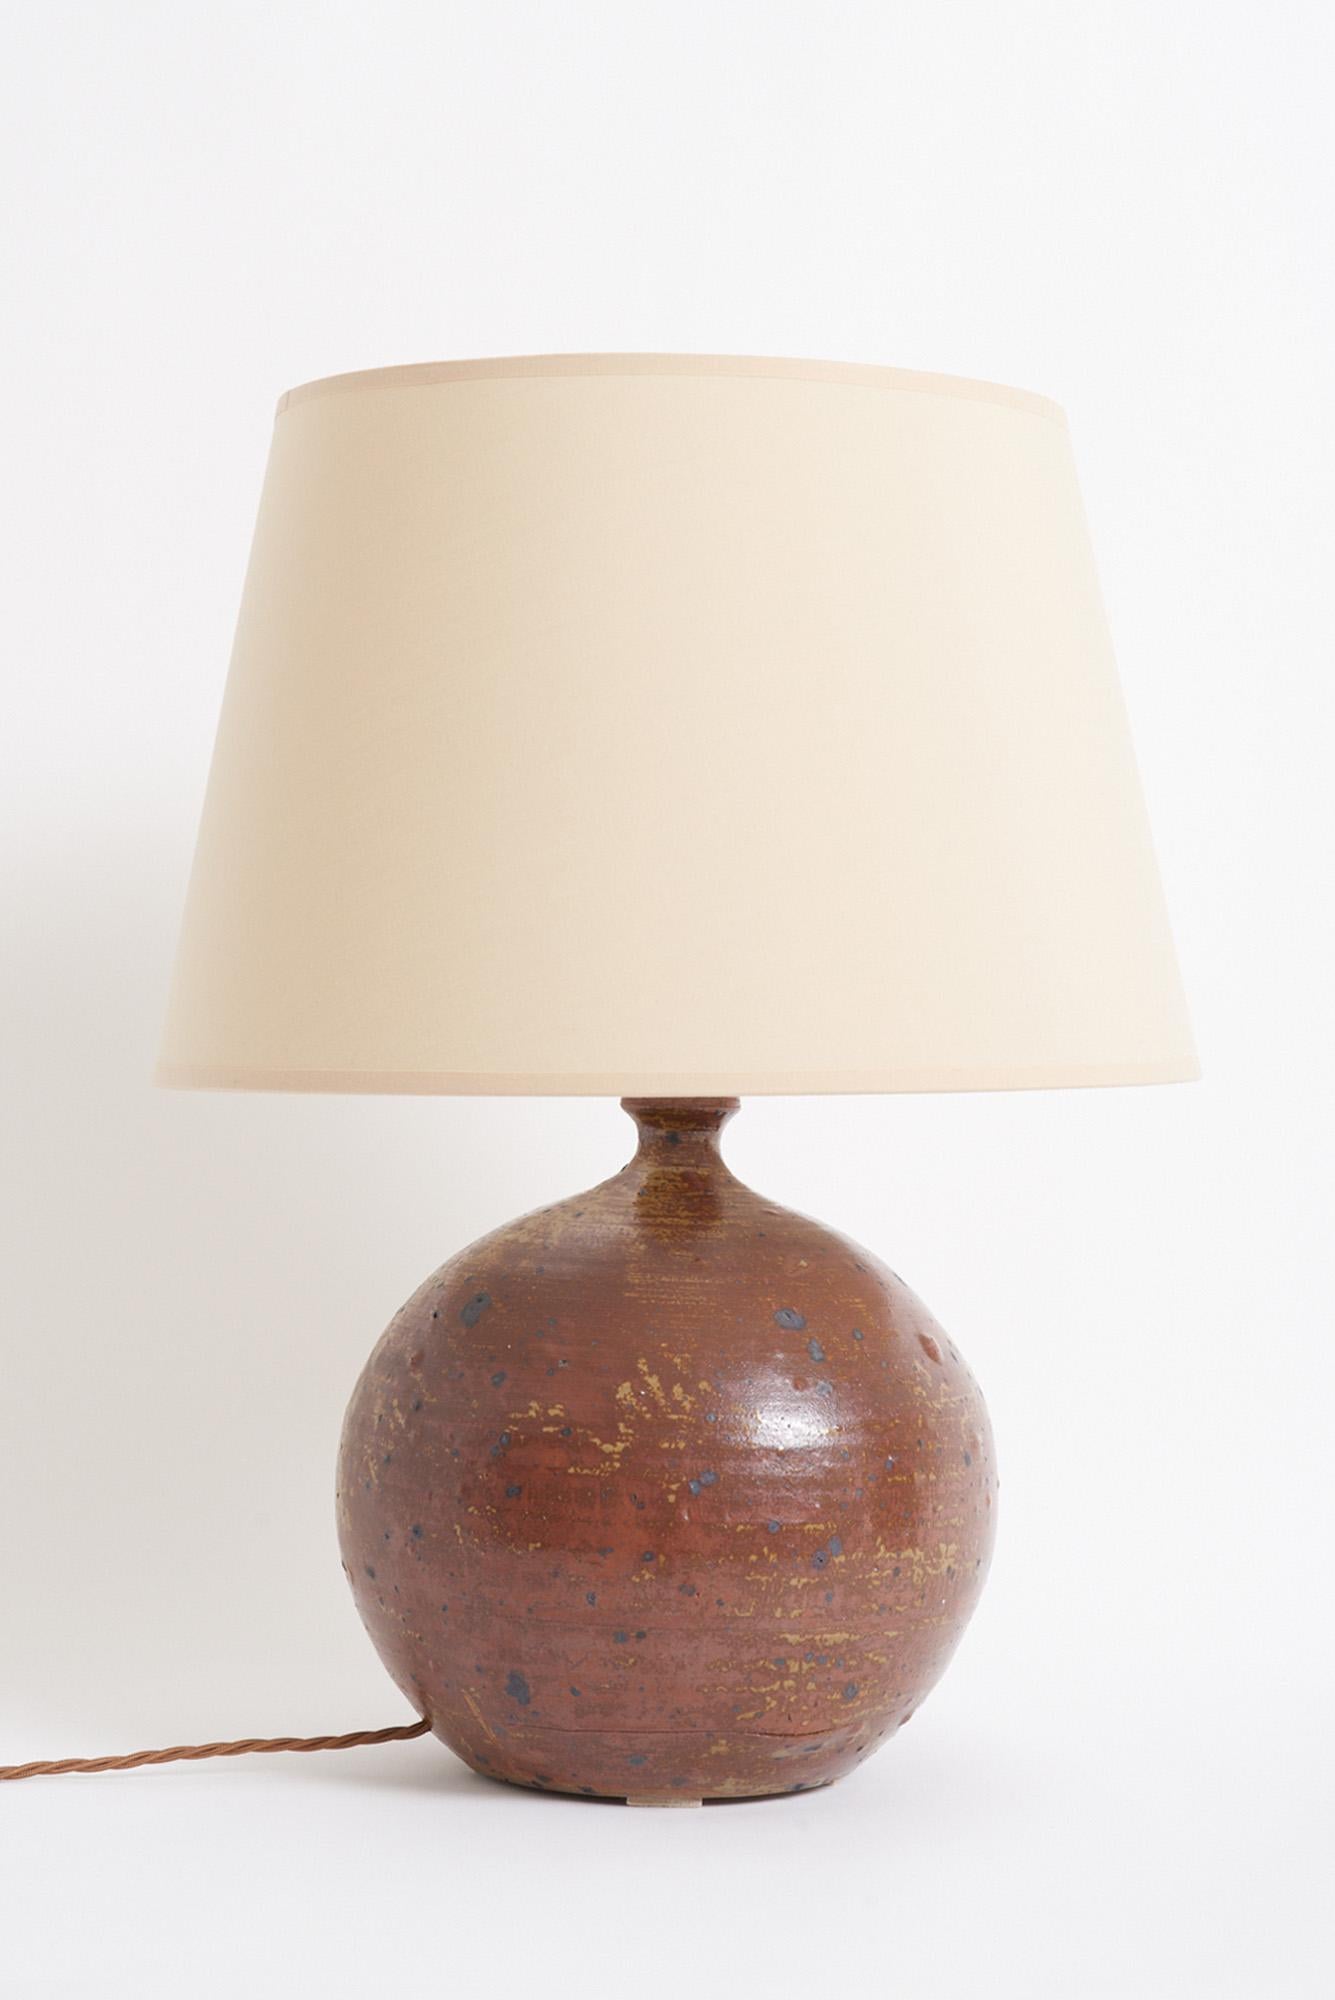 A turned stoneware table lamp.
France, 1960s
With the shade: 54 cm high by 40 cm diameter
Lamp base only: 35 cm high by 25 cm diameter